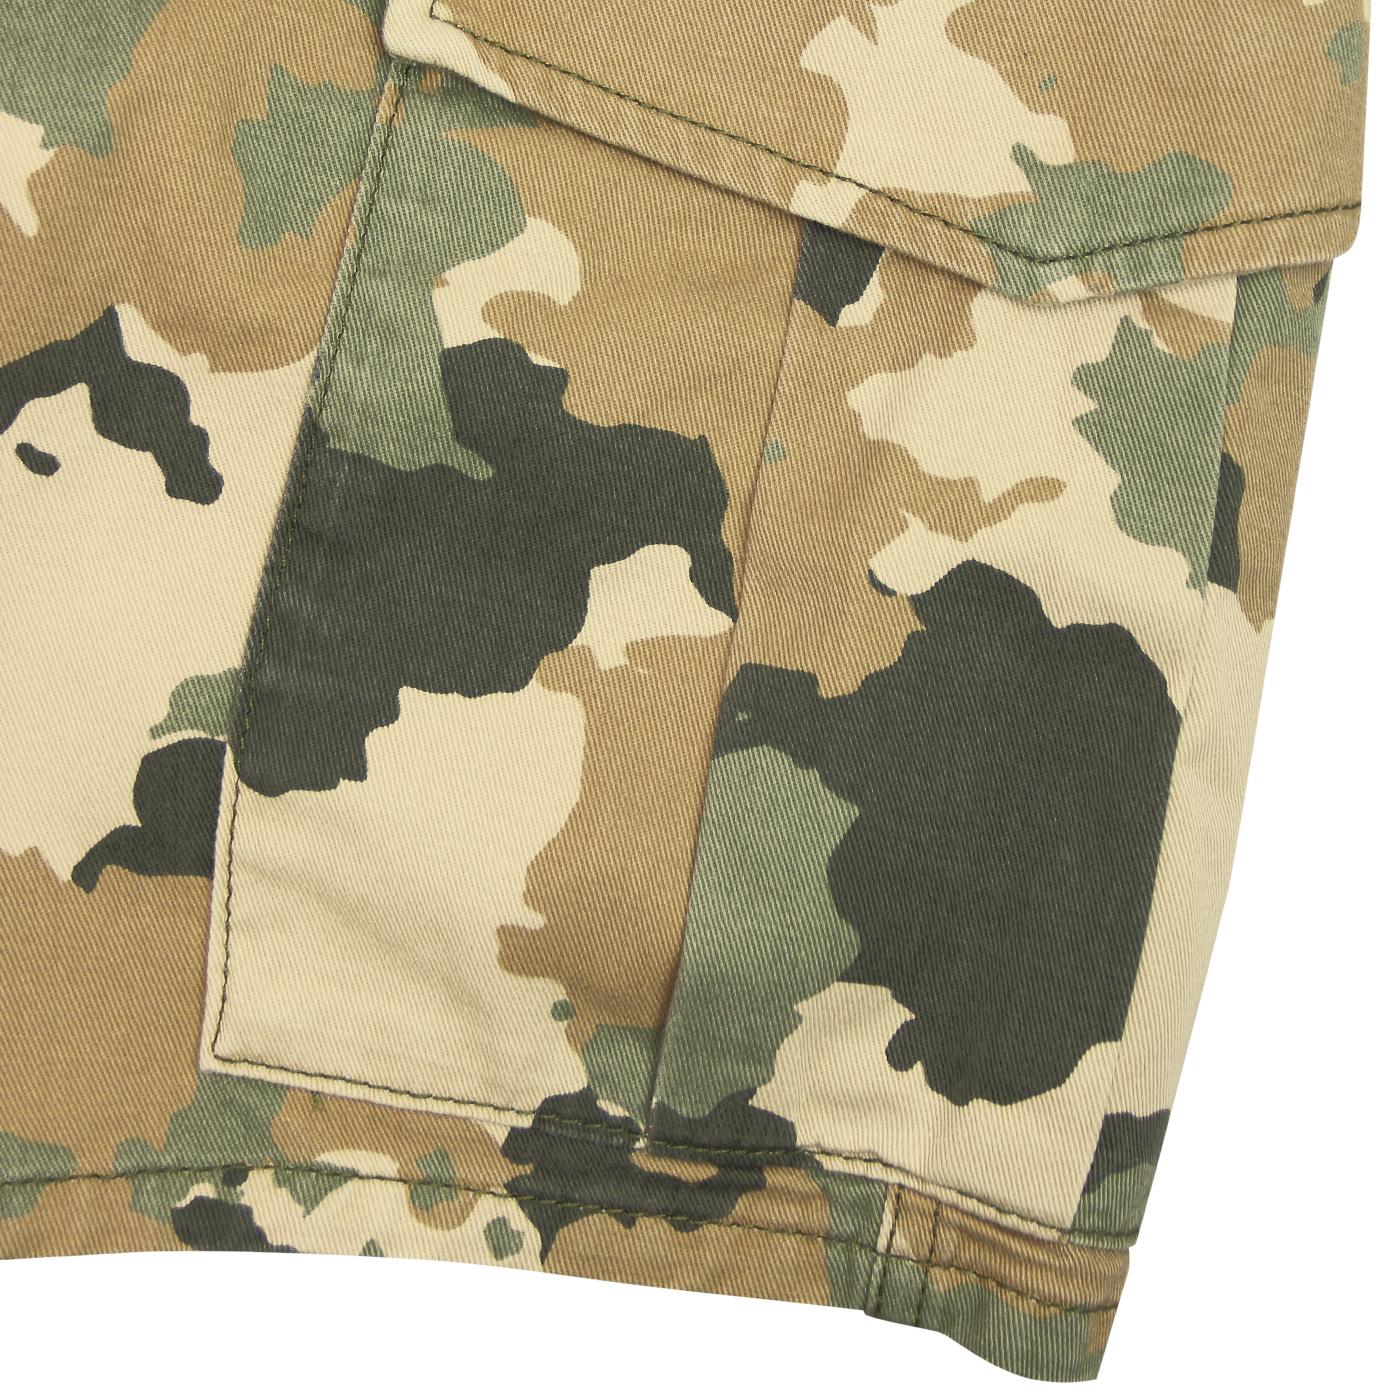 LEE JEANS Men's Retro Military Fatigue Shorts in Camouflage